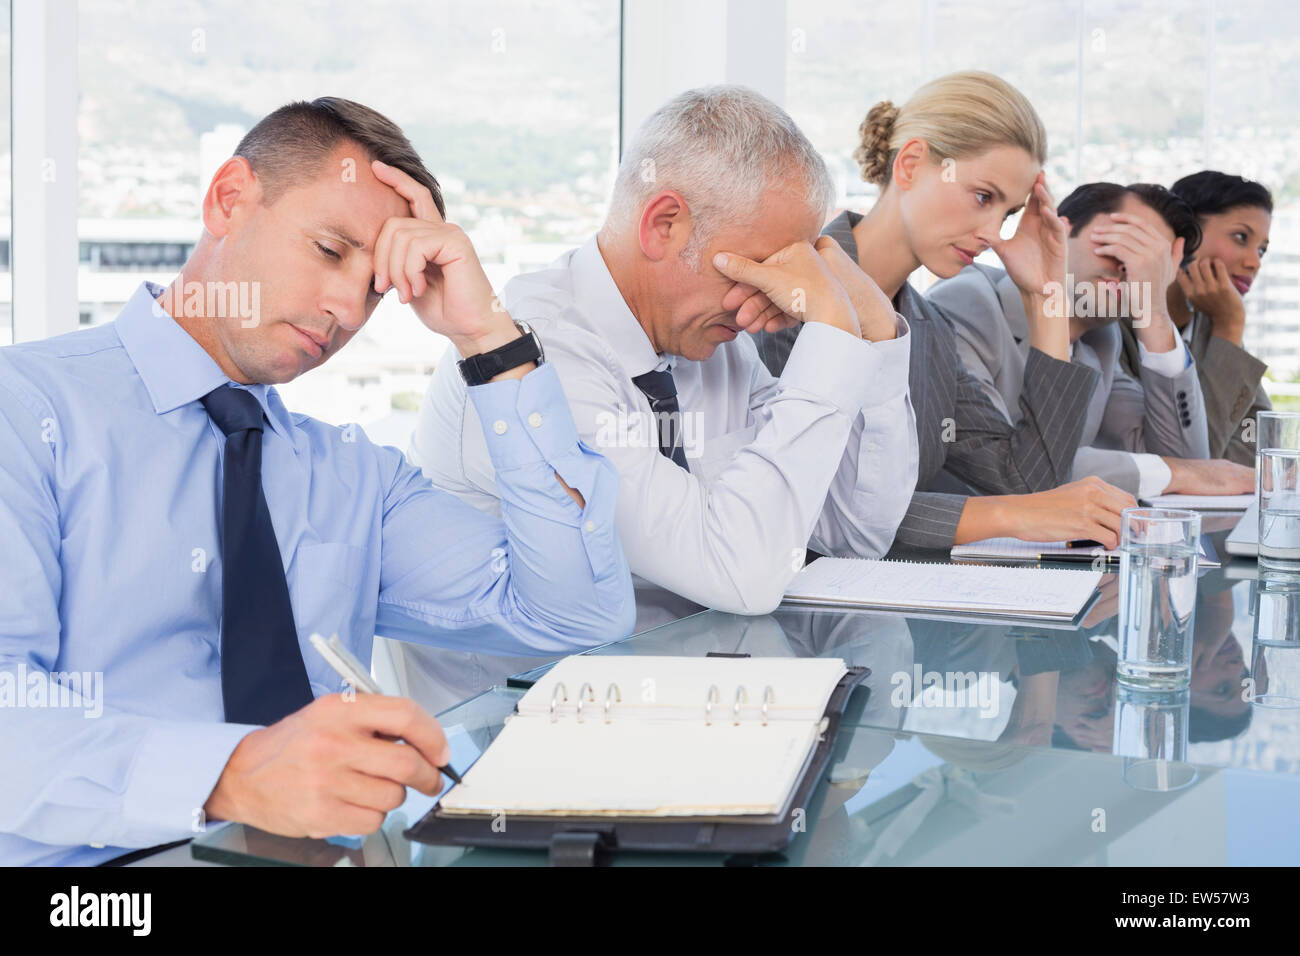 Tired business team at conference Stock Photo